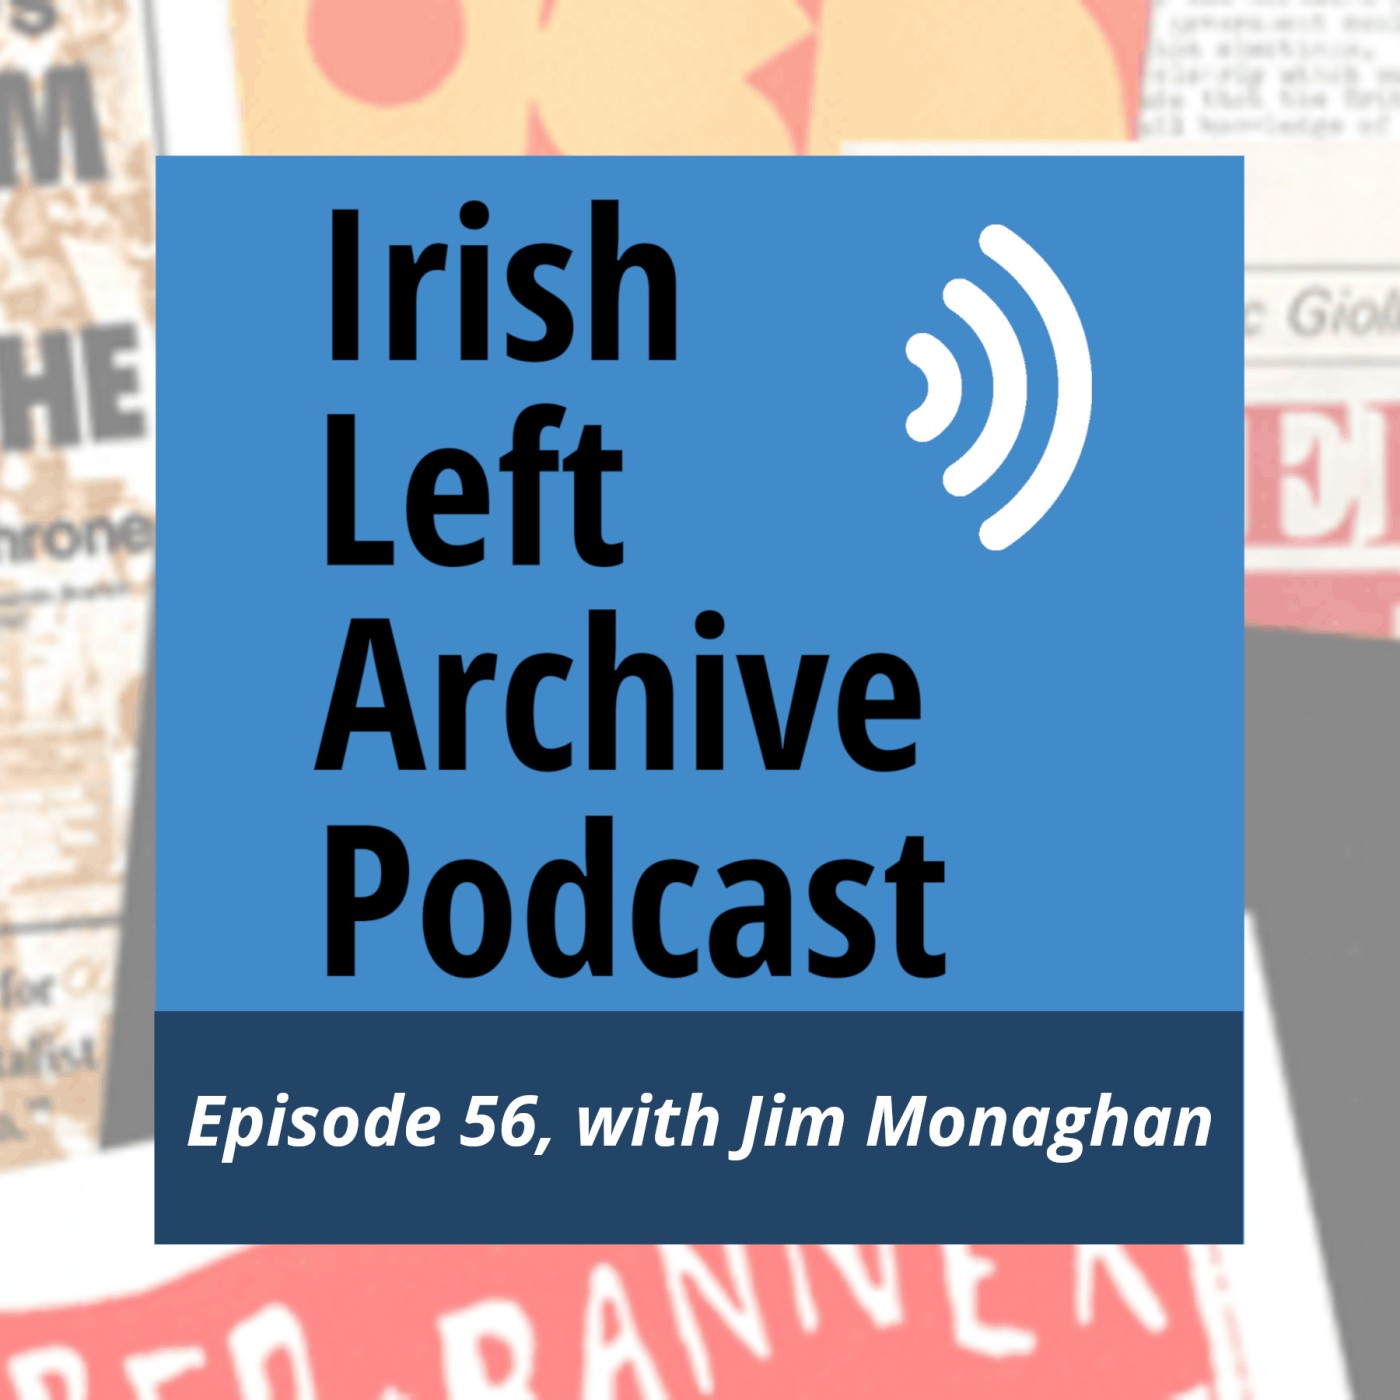 Jim Monaghan: LWR, Workers' League, Official Sinn Féin, People's Democracy, & the H-Block Armagh Committee